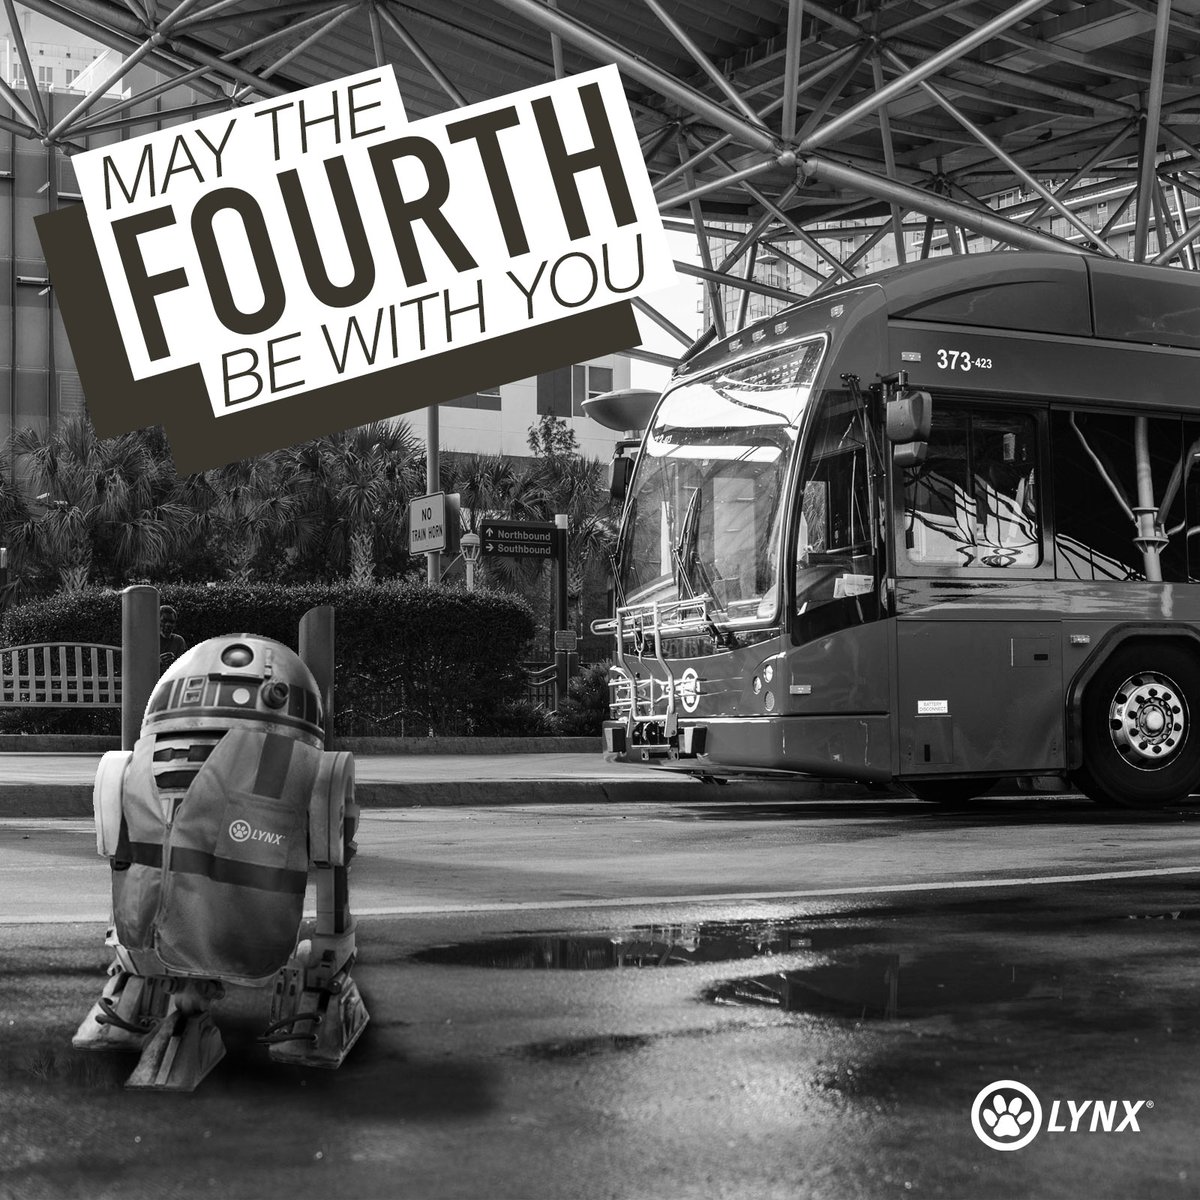 Attention, intergalactic travelers! These are the droids you're looking for! Headed to Batuu for an out-of-this-world adventure? Catch a ride on a LYNX bus for a journey to the off-world planet of your dreams! Plan your cosmic getaway: ow.ly/RoaV50Rpwbb #MayTheFourth